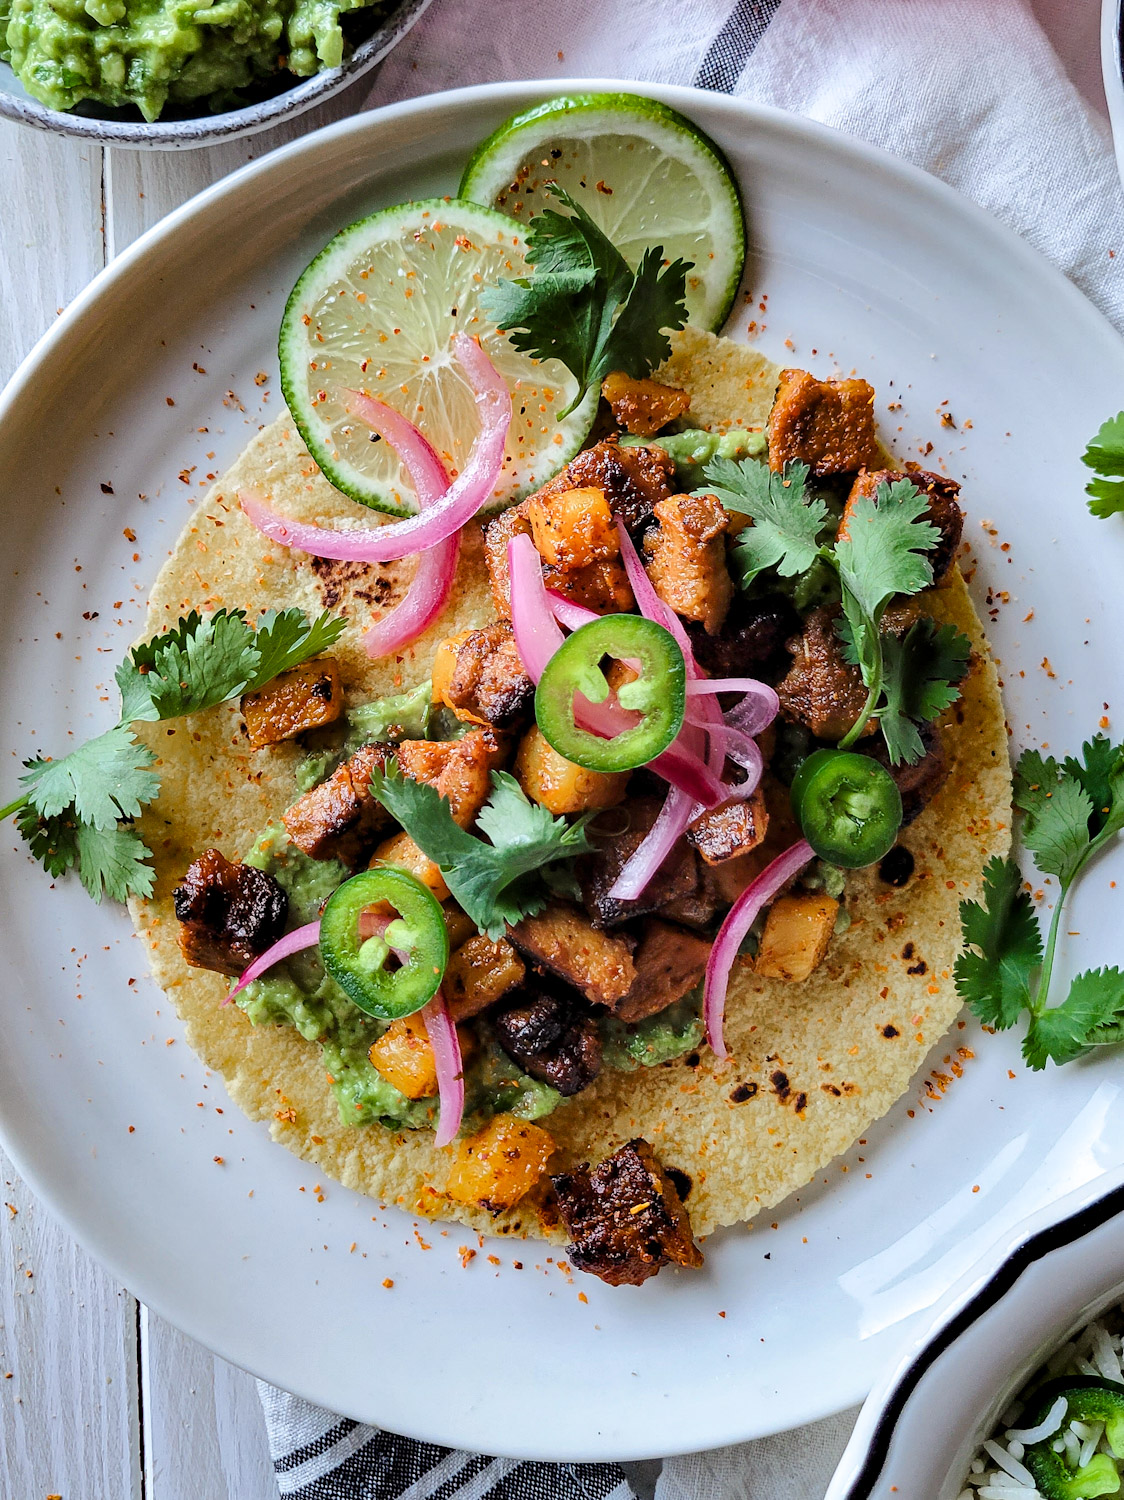 Al Pastor Pork and Pineapple taco with cilantro, pickled red onion and jalapeño pepper.